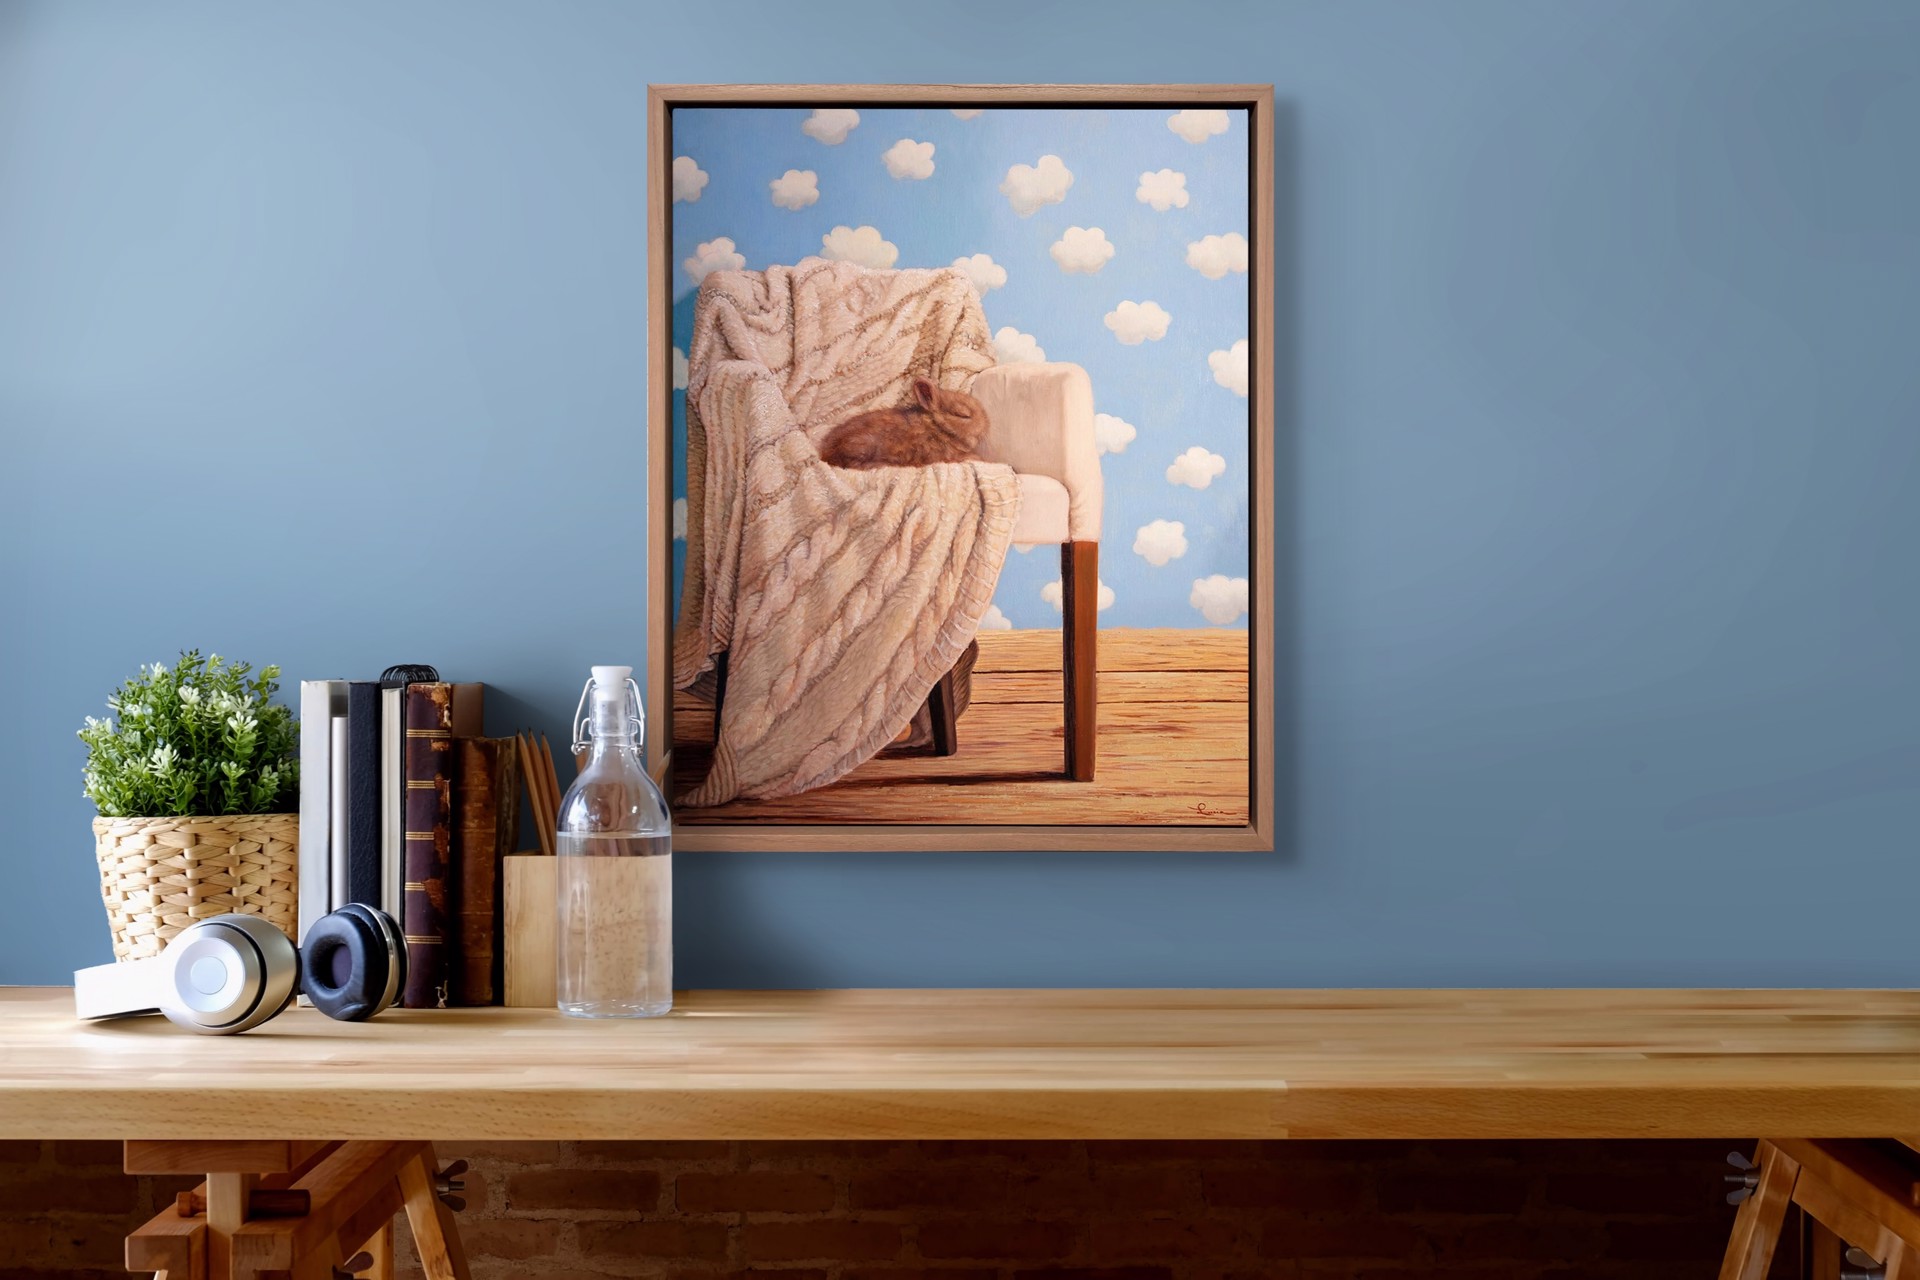 "Dreamer" by Lucia Heffernan, an oil painting depicting a cozy interior with a chair draped in a textured blanket, set against a whimsical sky with fluffy clouds.